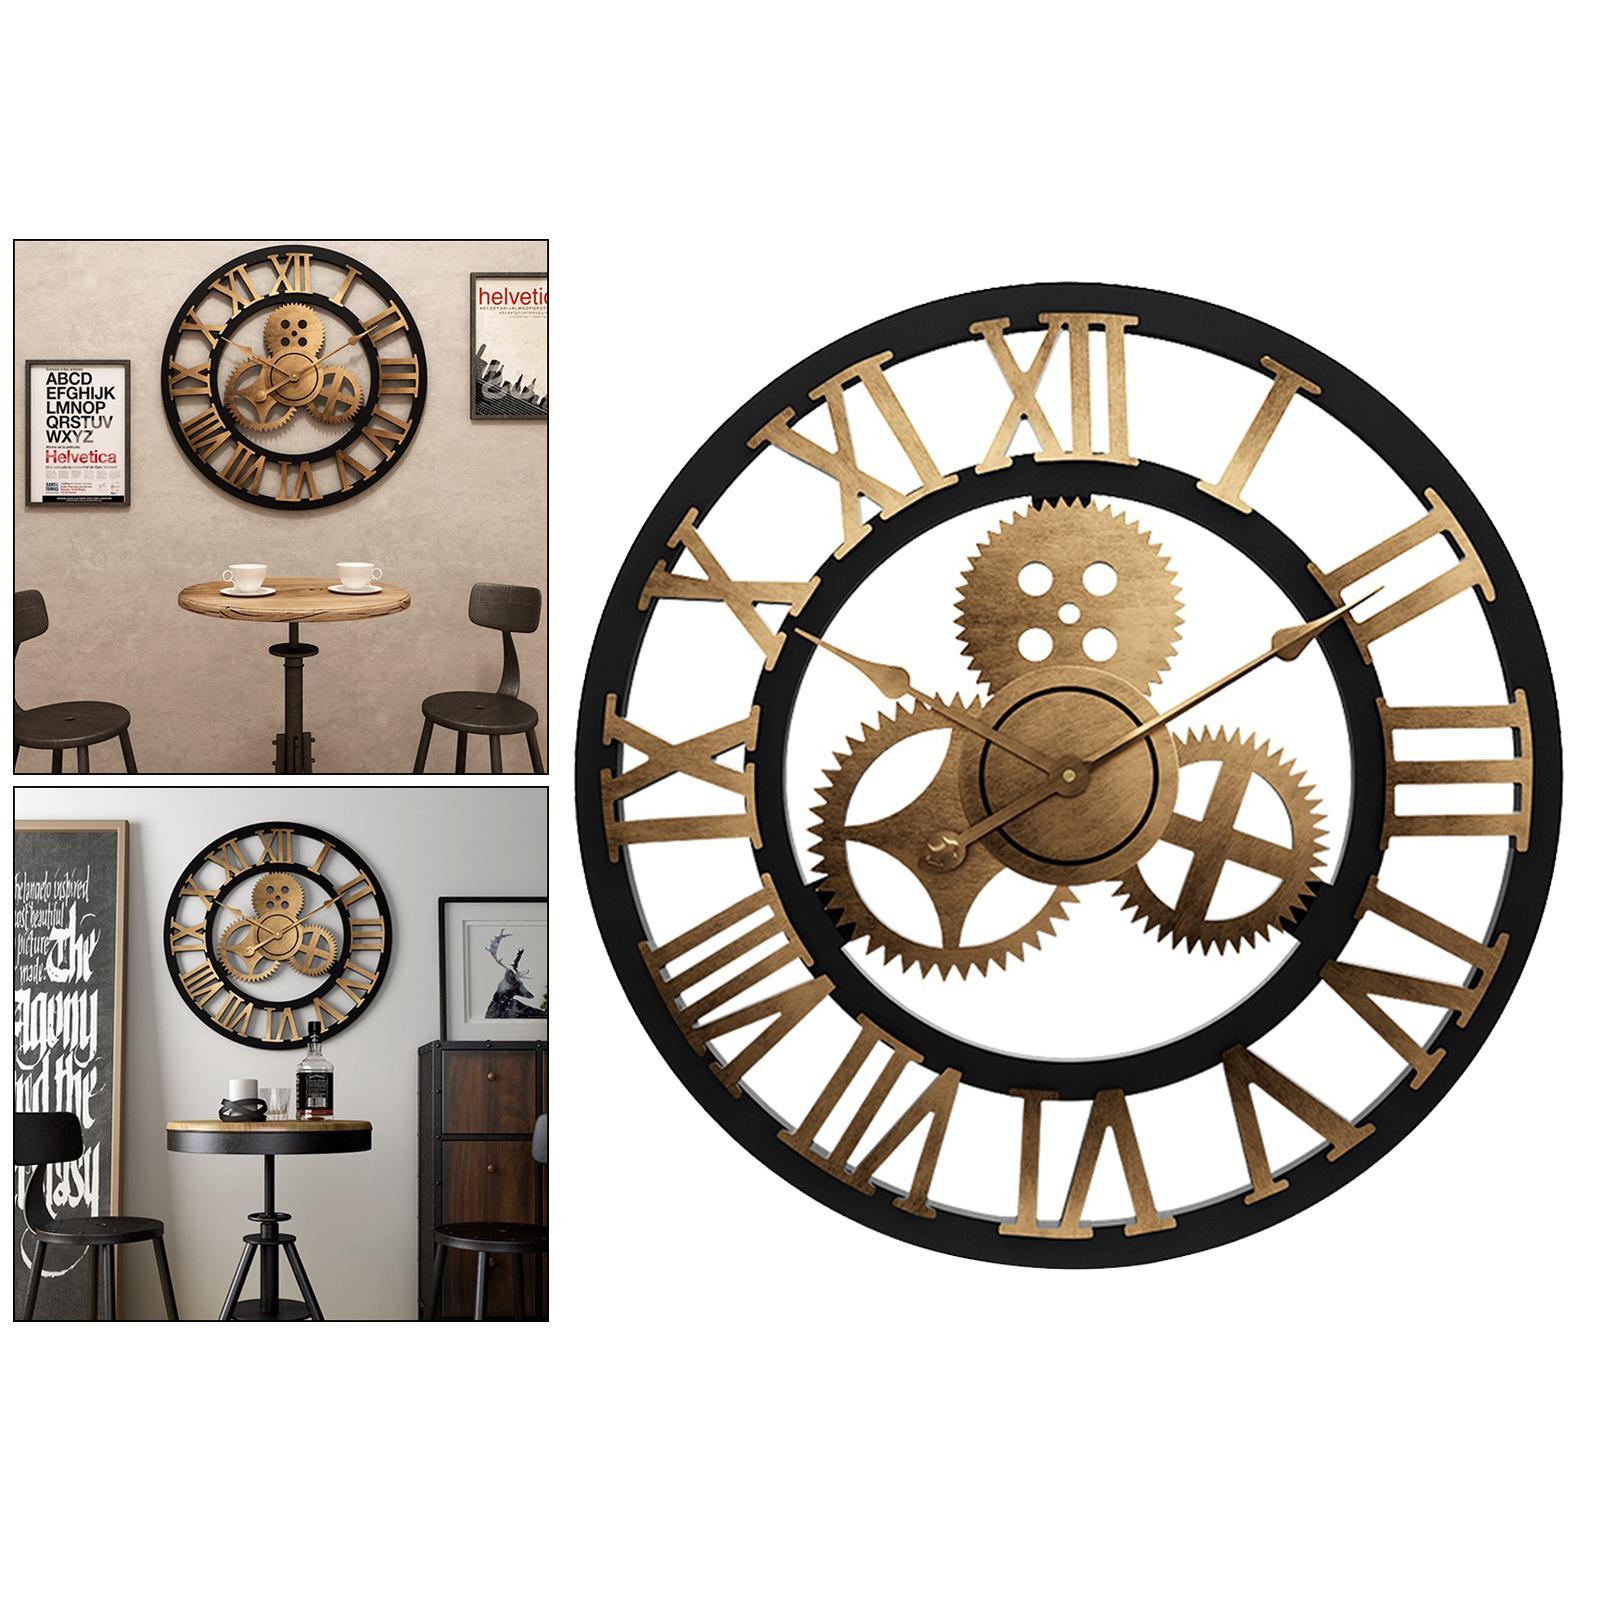 Large 3D Retro Wooden Wall Clock House Warming Gift Roman Numeral